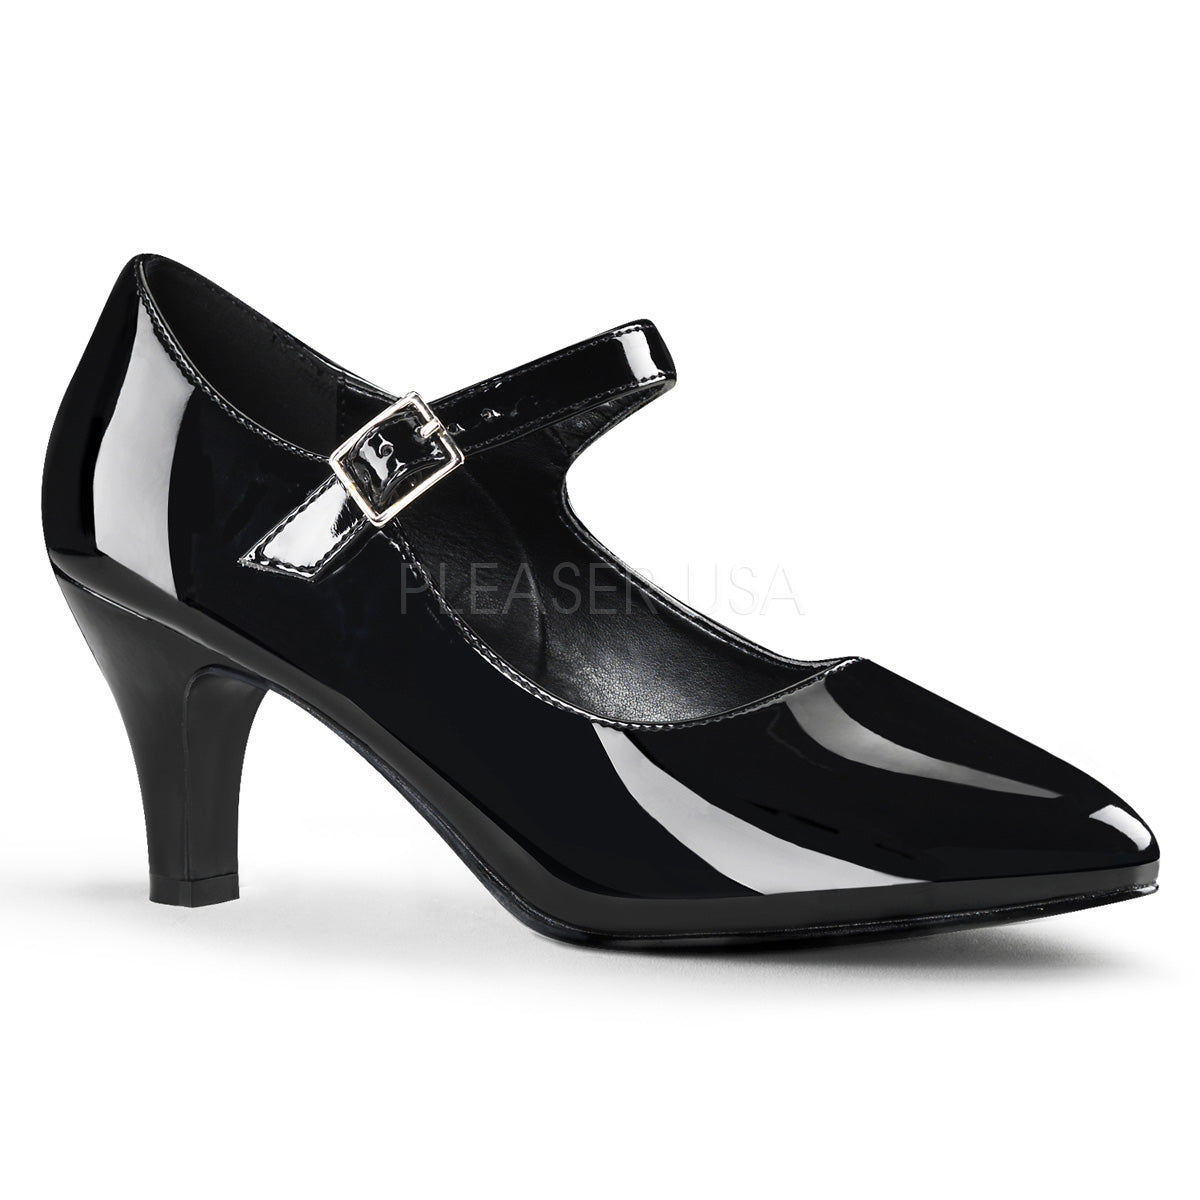 Divine D'Orsay Mary Jane Shiny Pumps